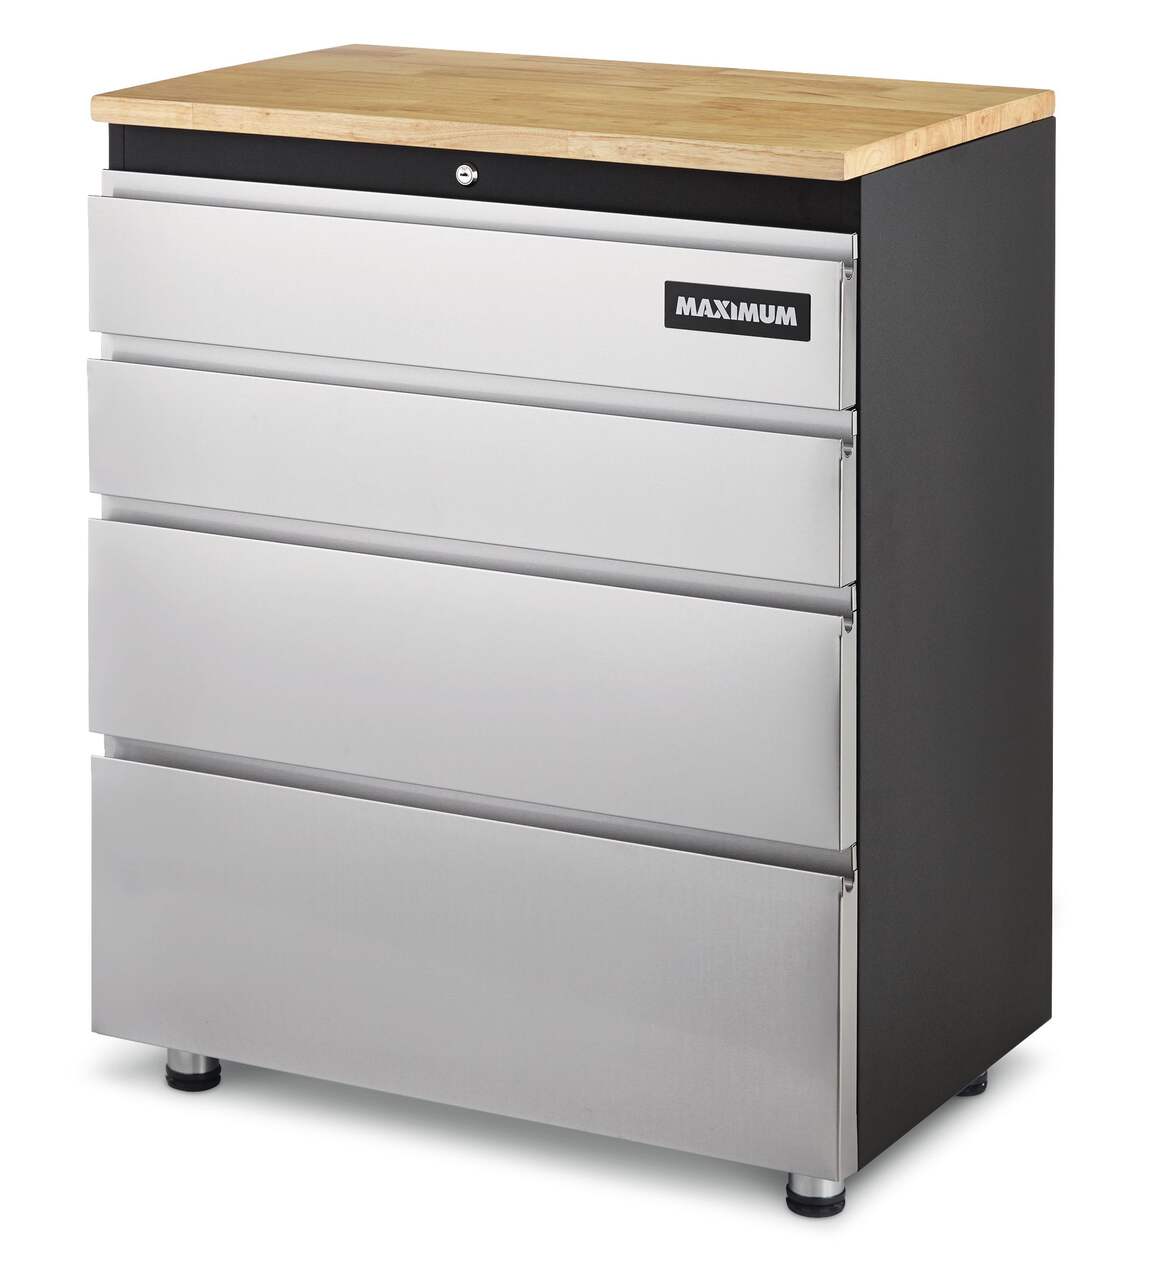 MAXIMUM 4-Drawer Wooden Top Base Storage Cabinet, Stainless Series, 37 x 30  x 18-in